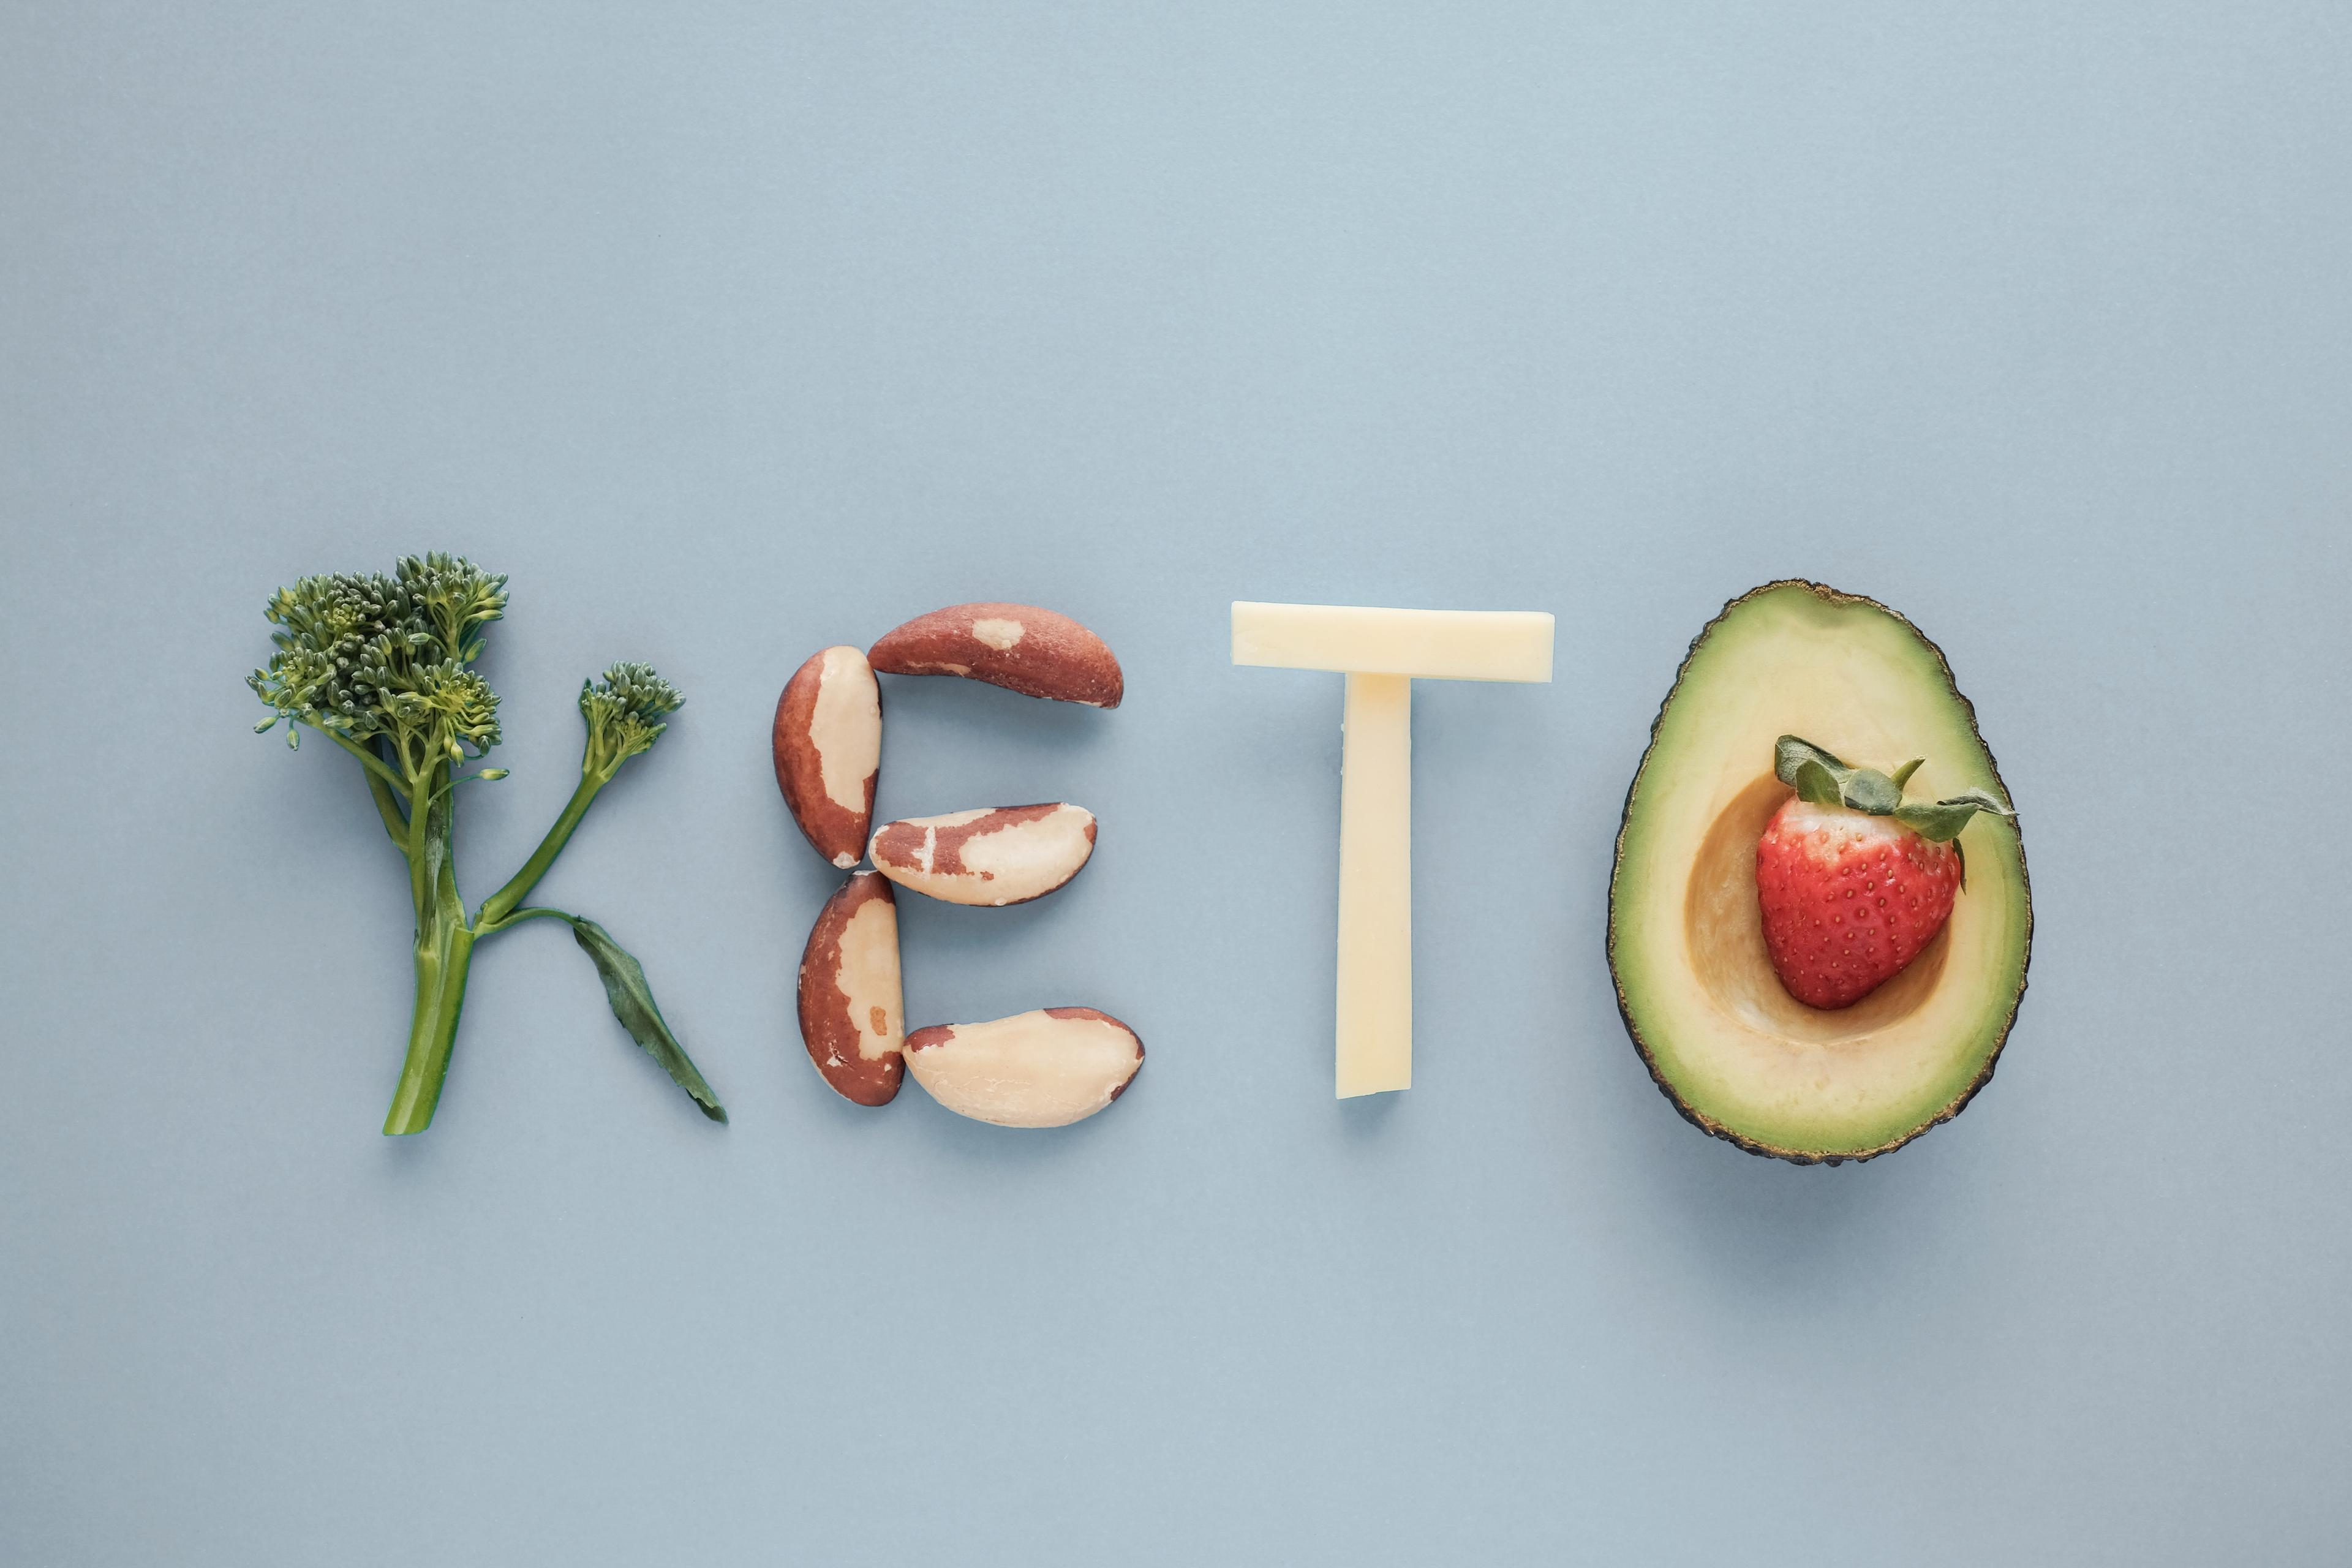 Keto Diet: Benefits, Foods List, and Tips for Beginners